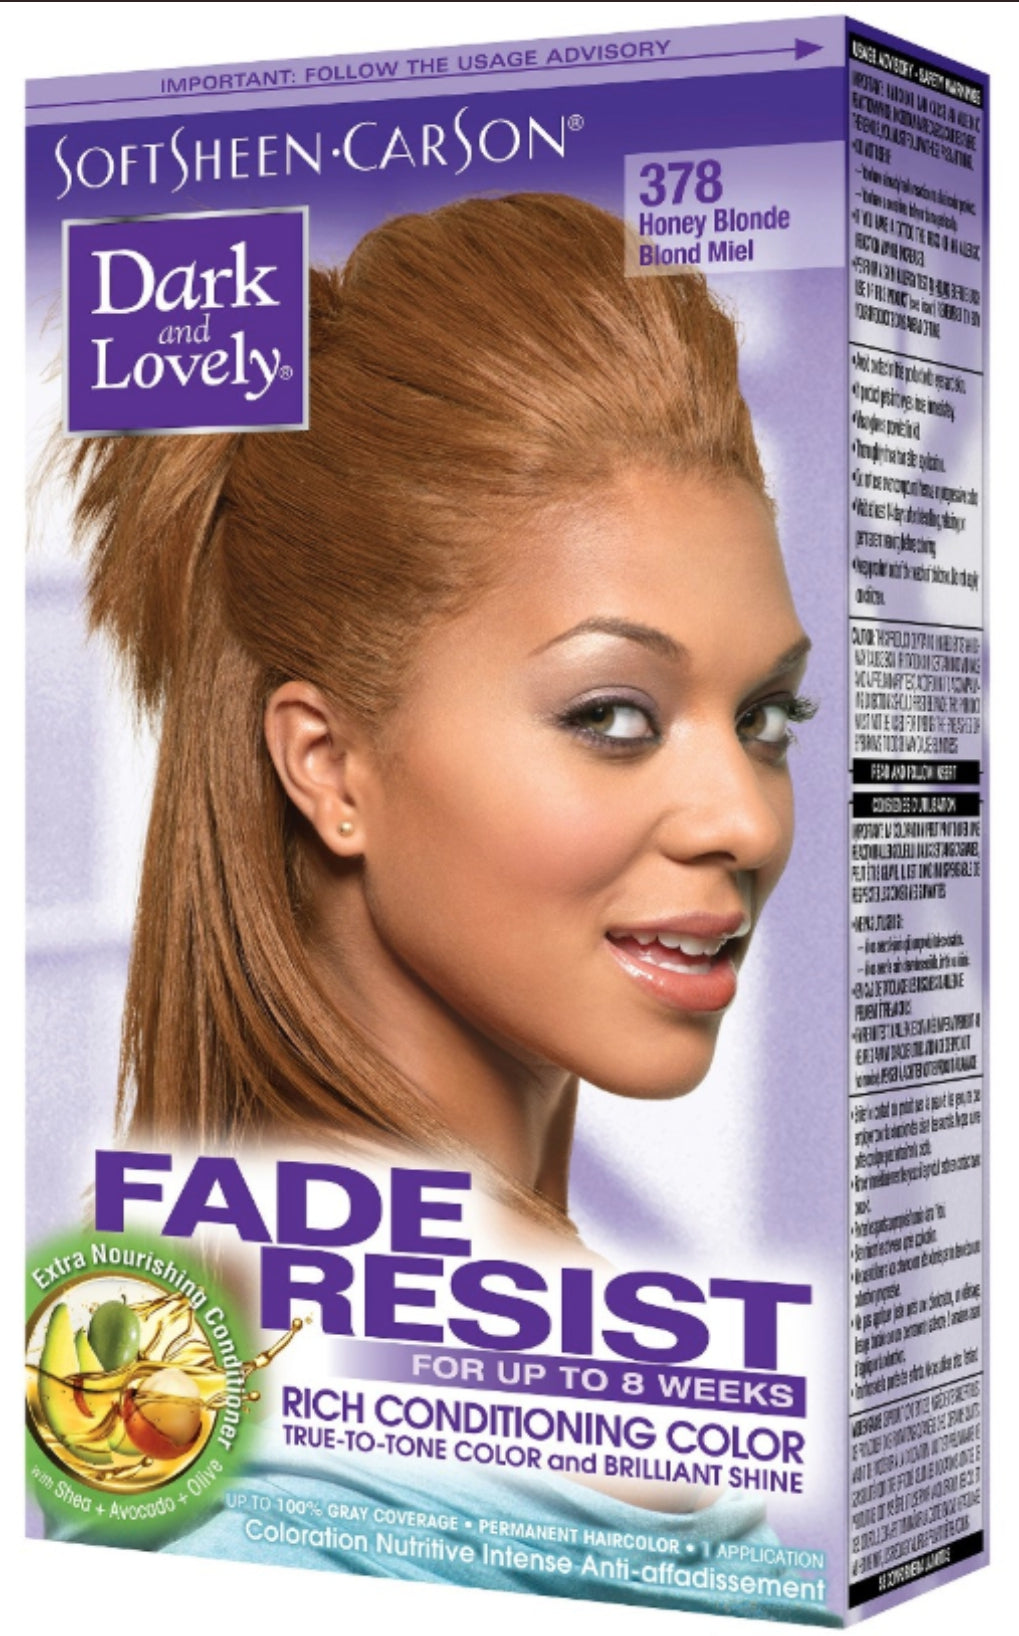 Dark and Lovely Fade Resist Hair Color Honey Blonde 378